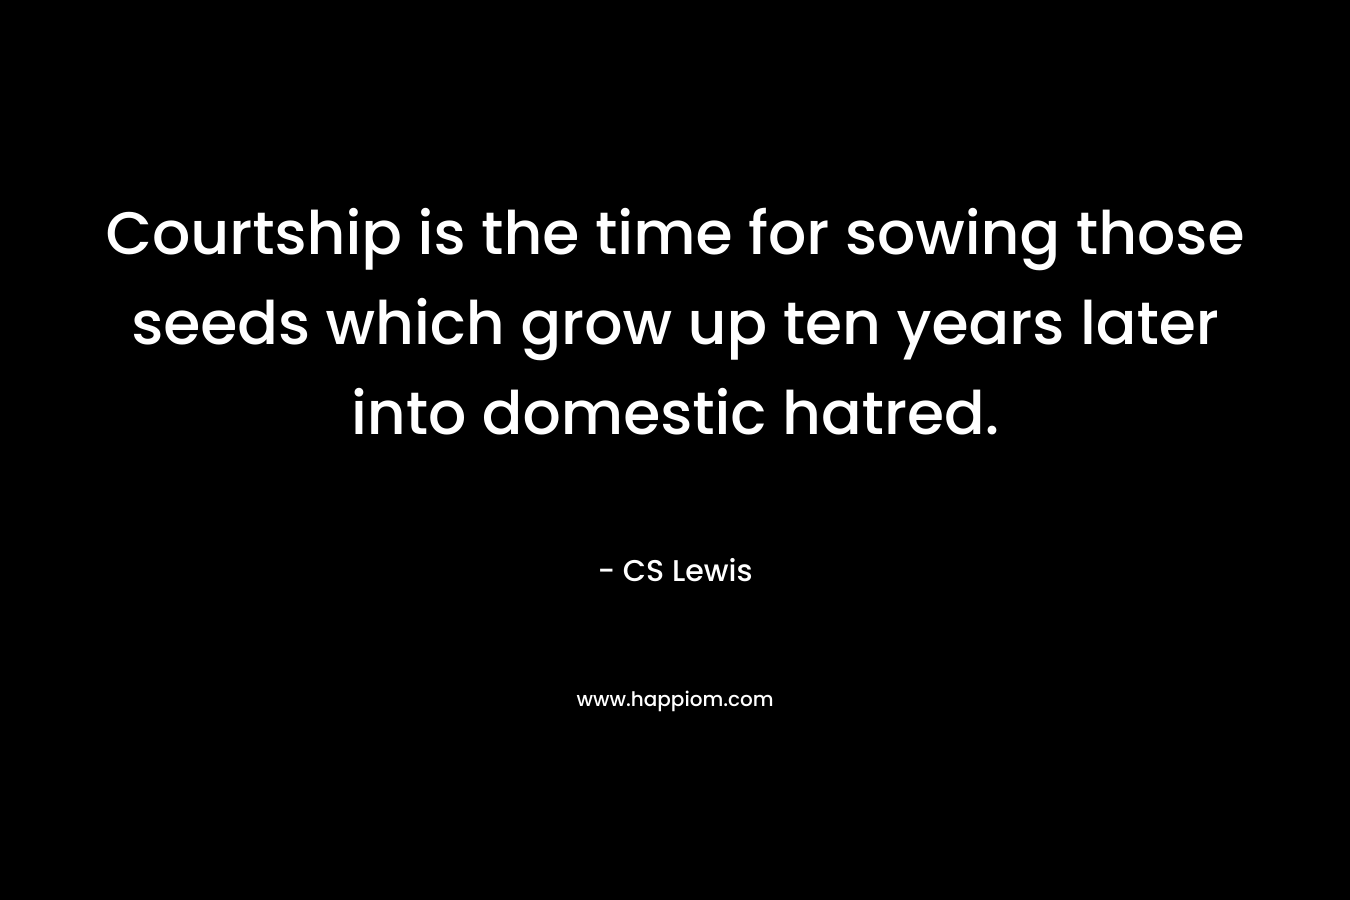 Courtship is the time for sowing those seeds which grow up ten years later into domestic hatred. – CS Lewis